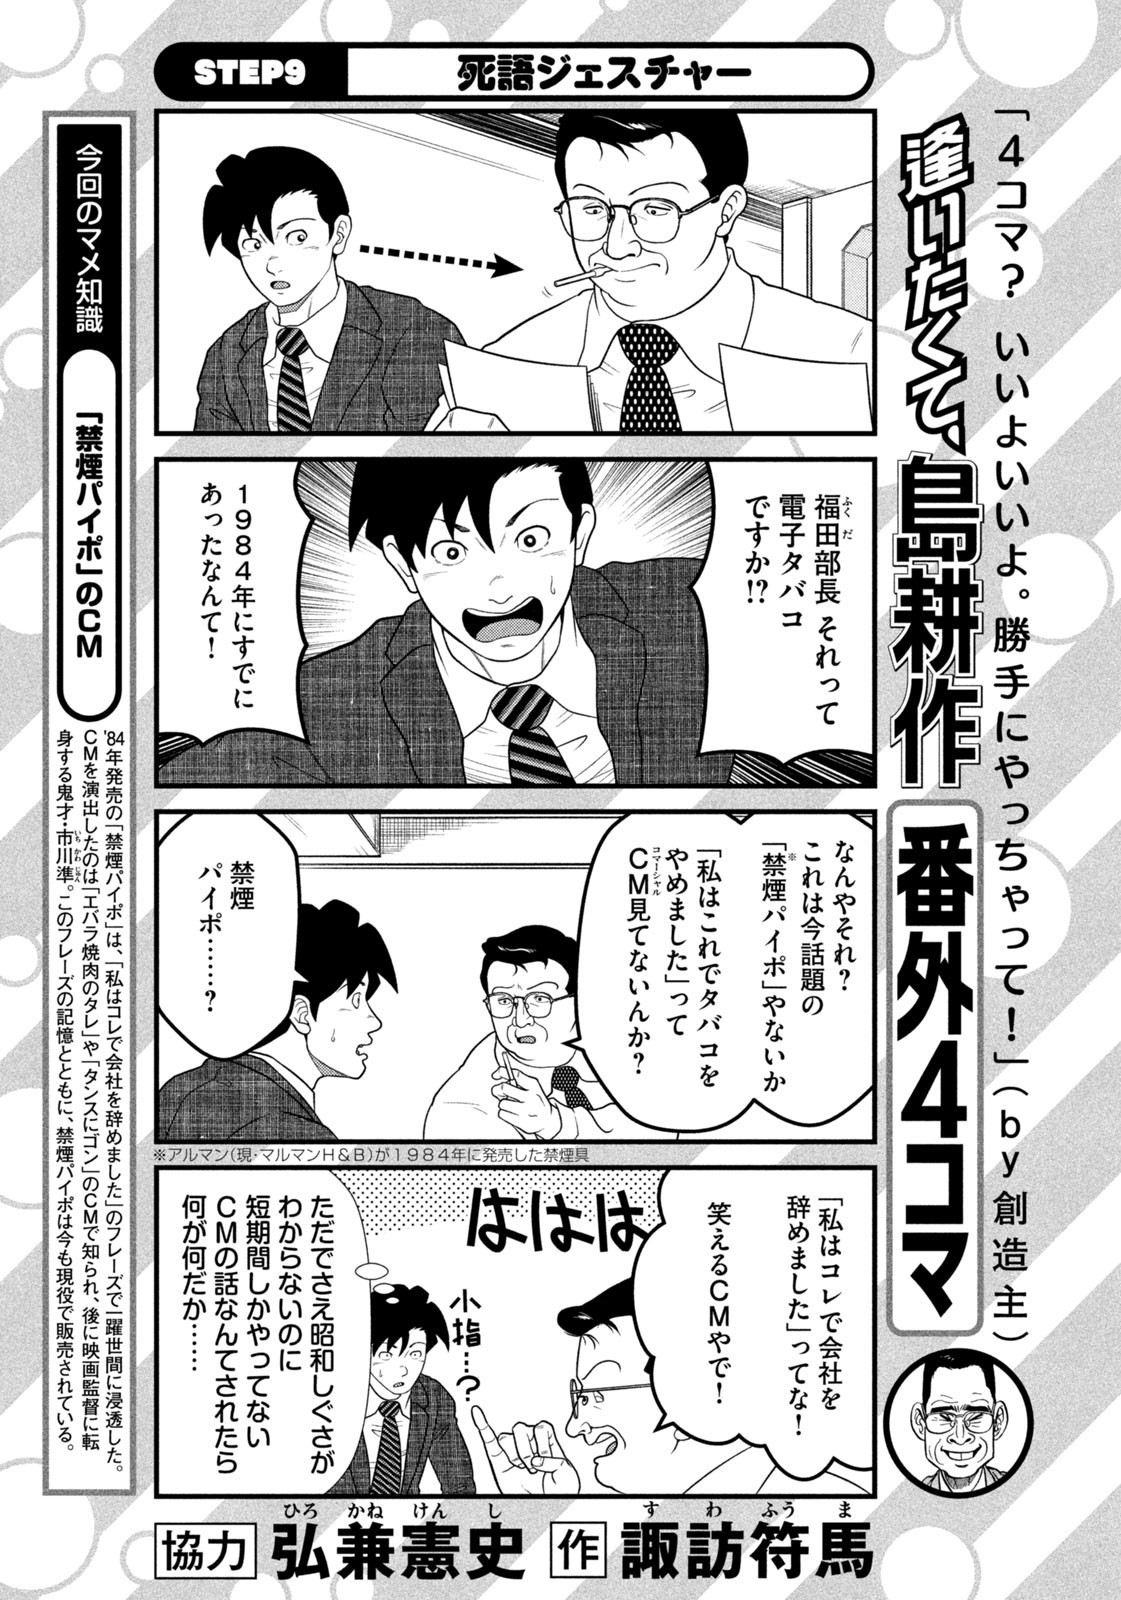 Weekly Morning - 週刊モーニング - Chapter 2023-50 - Page 446